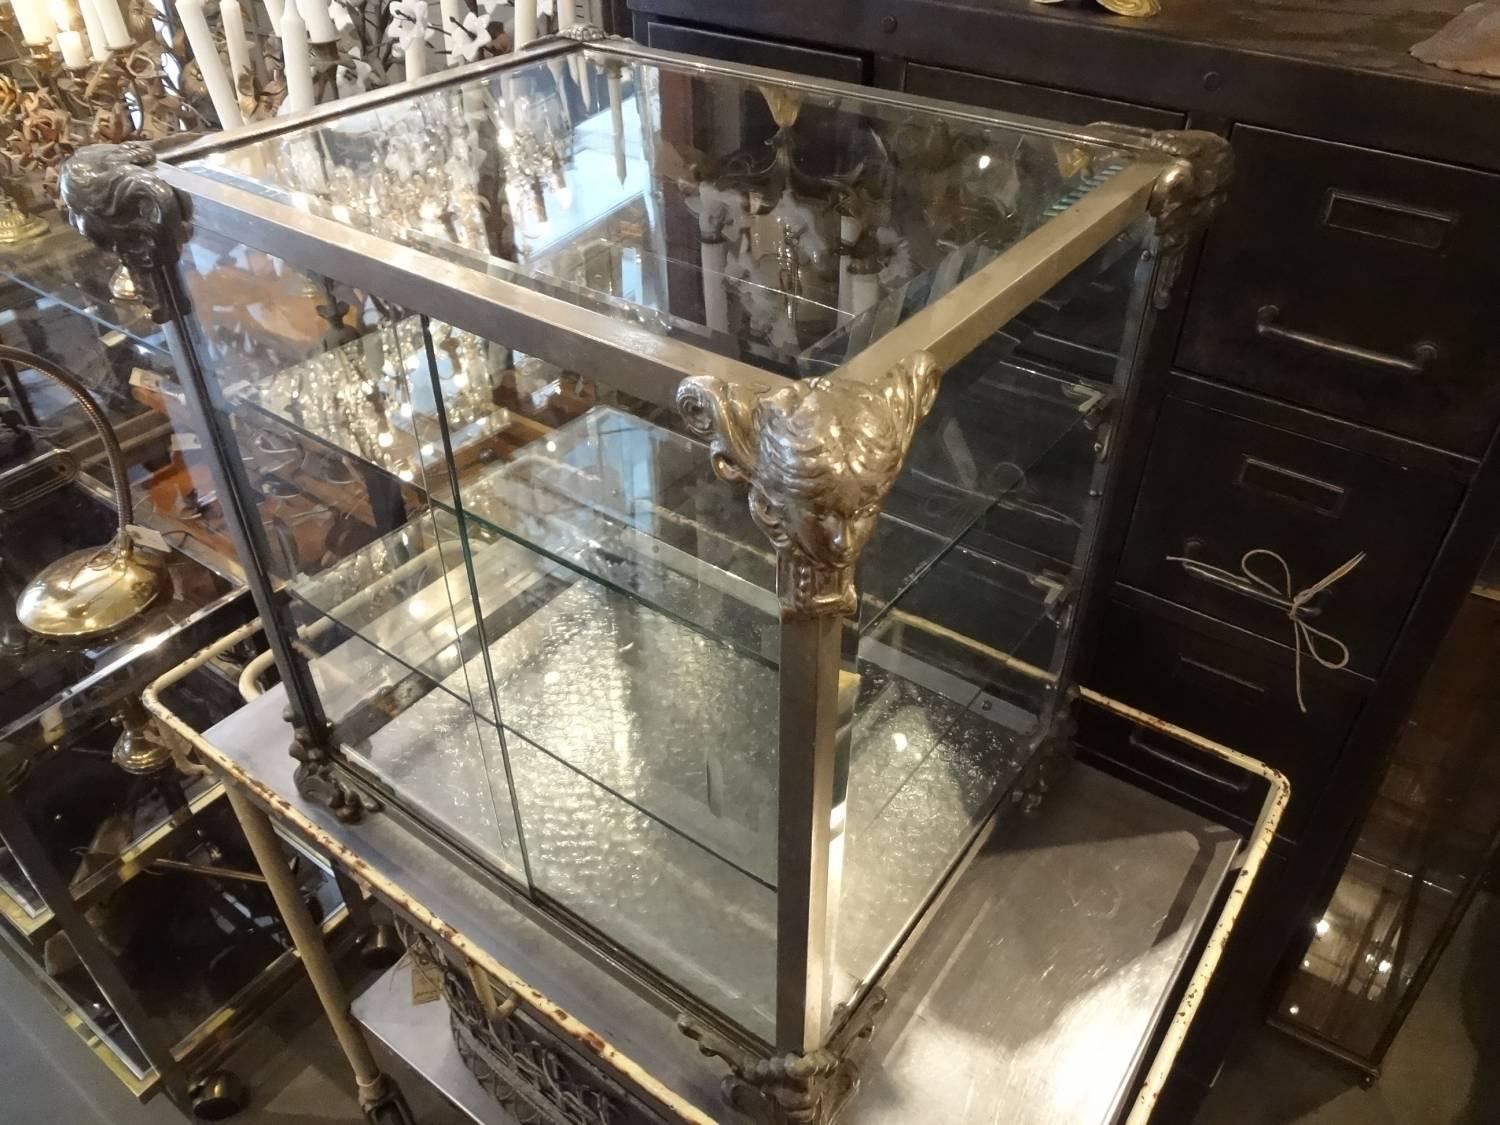 Stunning Art Nouveau boutique display unit, from 1890s France. Beautifully executed in patinated chromed cast iron, with ornamented details on the top and base. Glass sliding doors and two glass shelves.